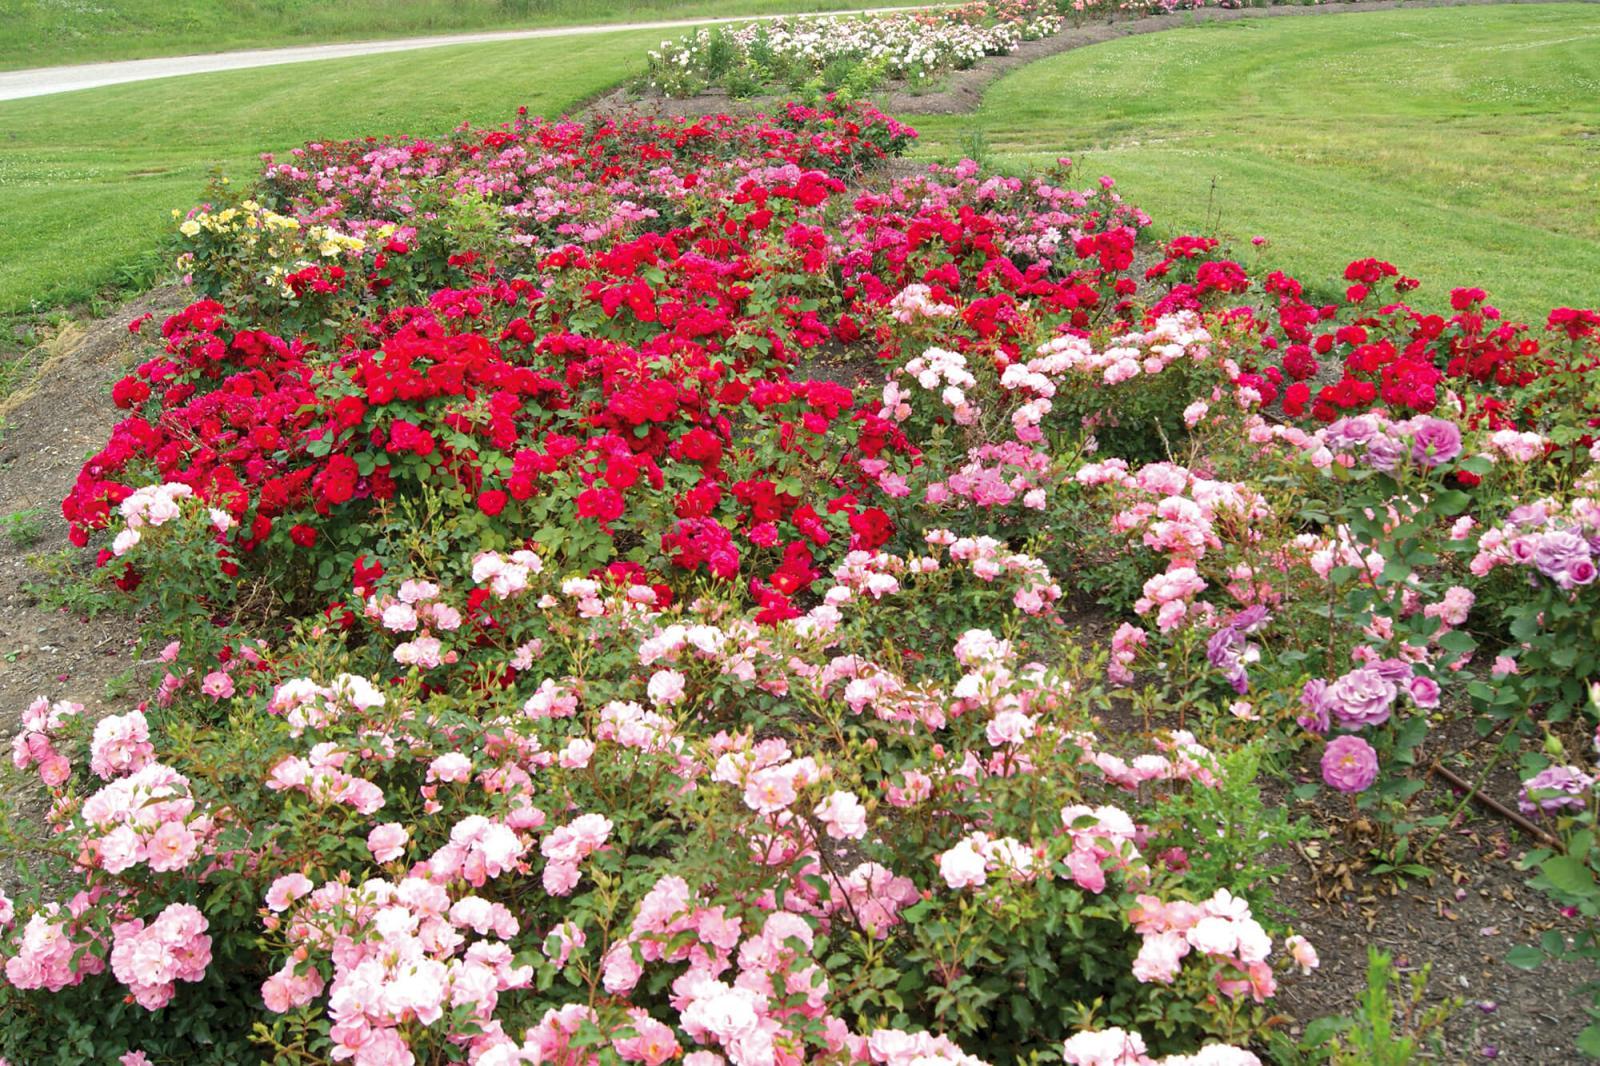 Rose trial reveals good prospects for the Ontario landscape industry